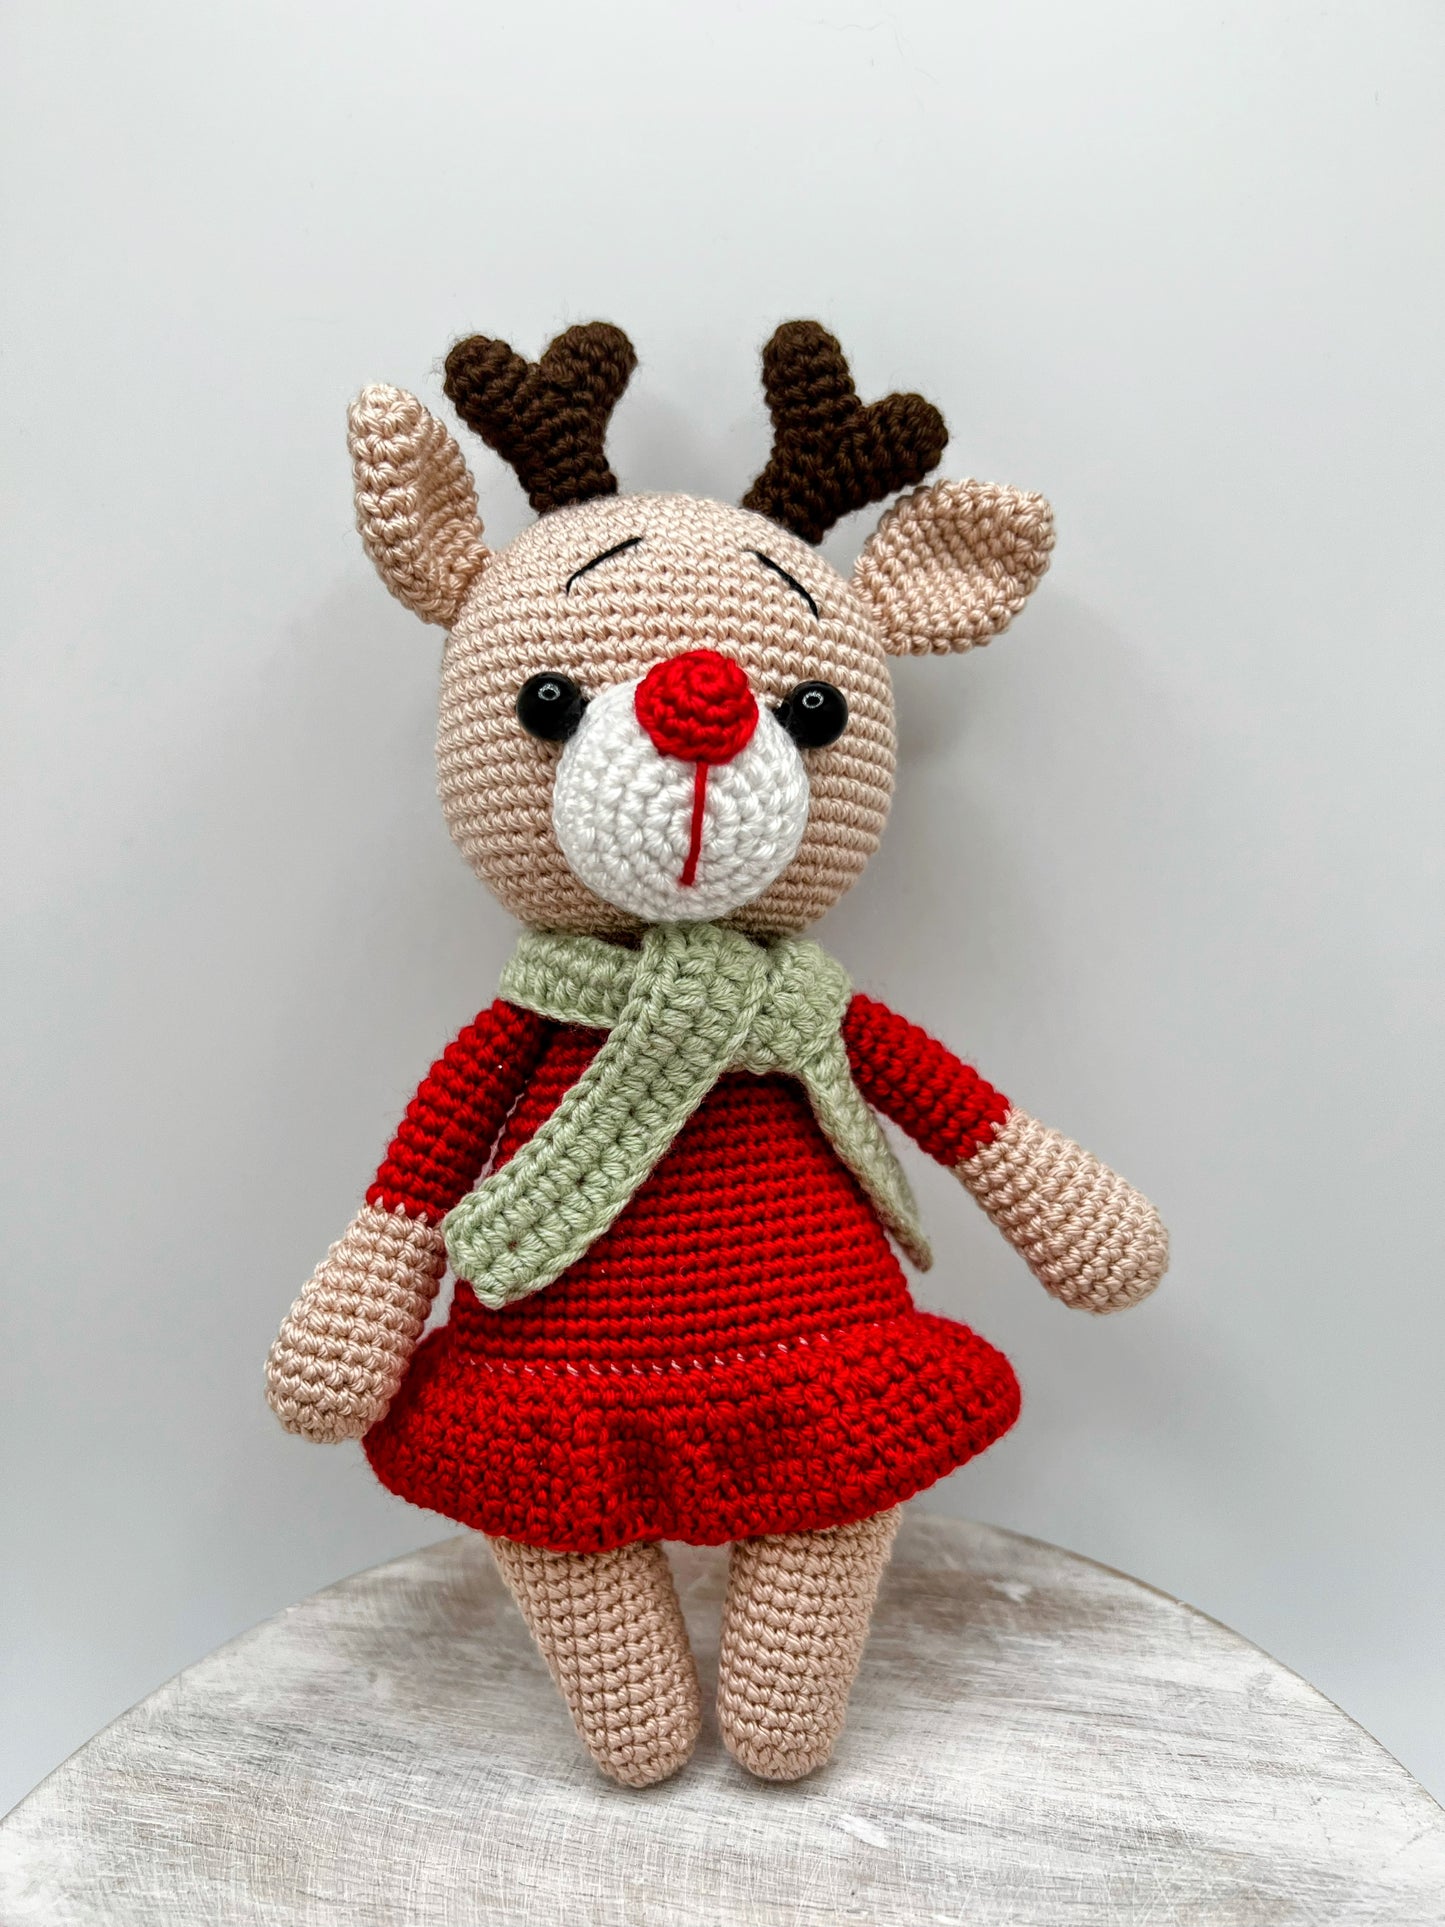 Stuffed Deer Toy With Red Dress- Crochet Knitted Amigurumi Toy